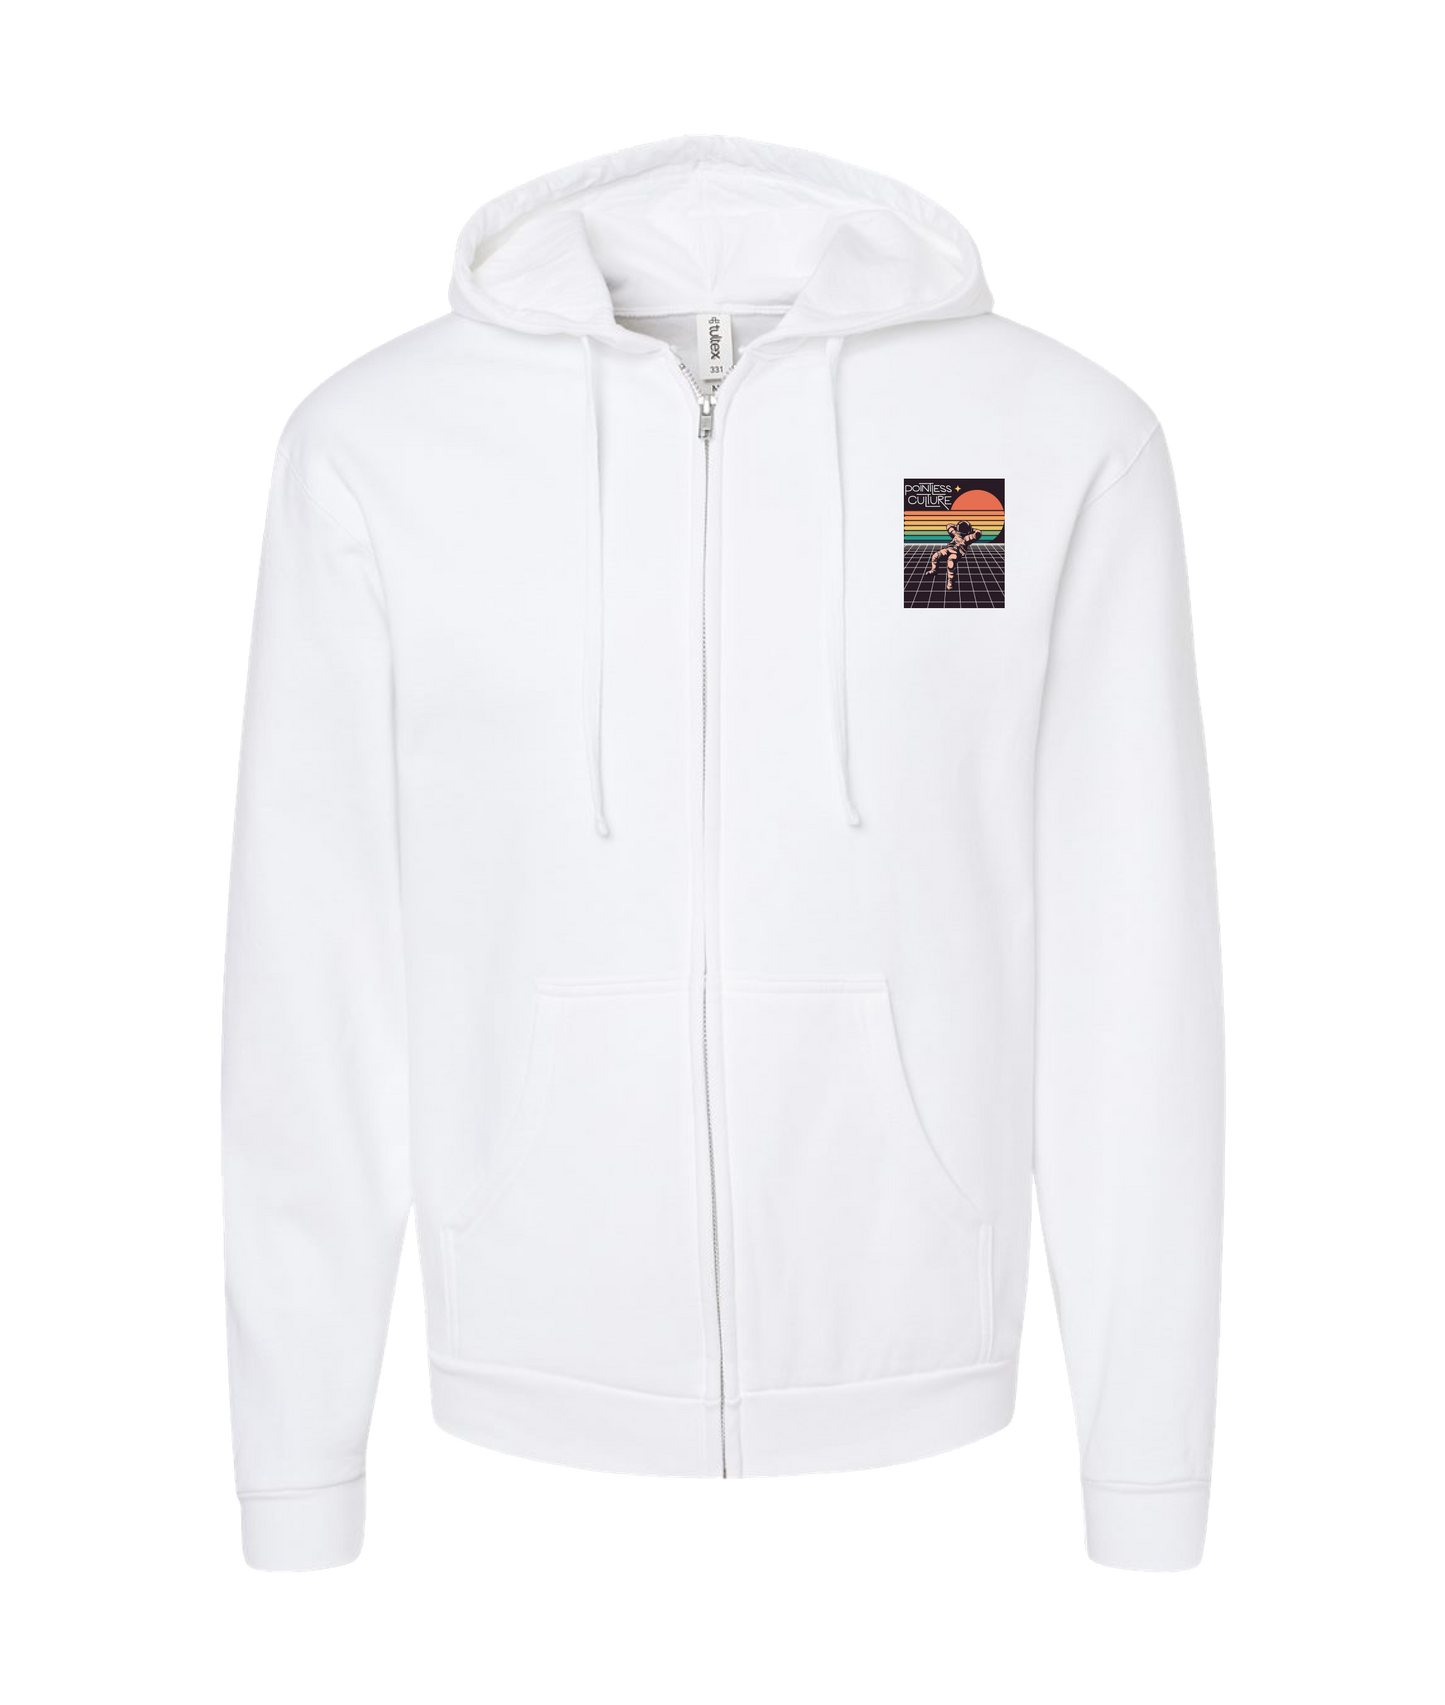 Pointless Culture - PC Astronaut - White Zip Up Hoodie